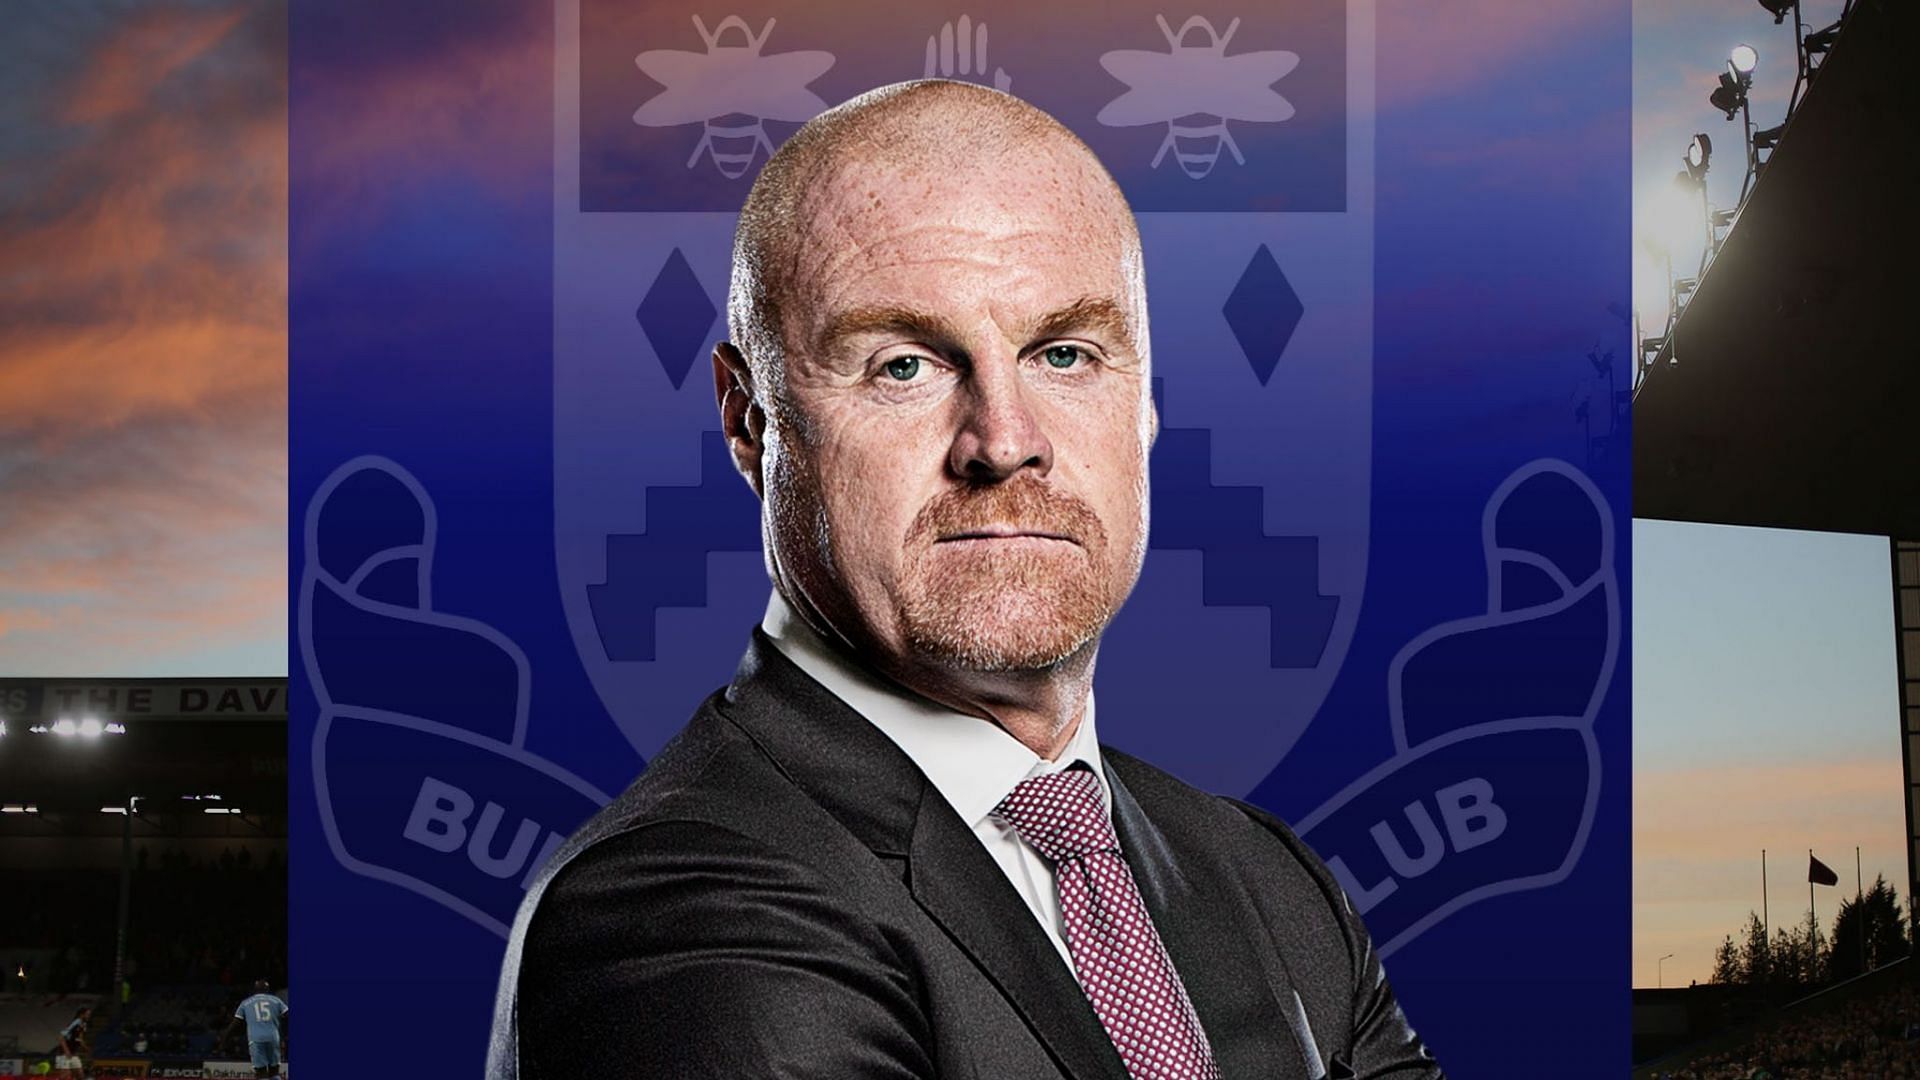 An Underrated footballing genius in EPL: Sean Dyche.